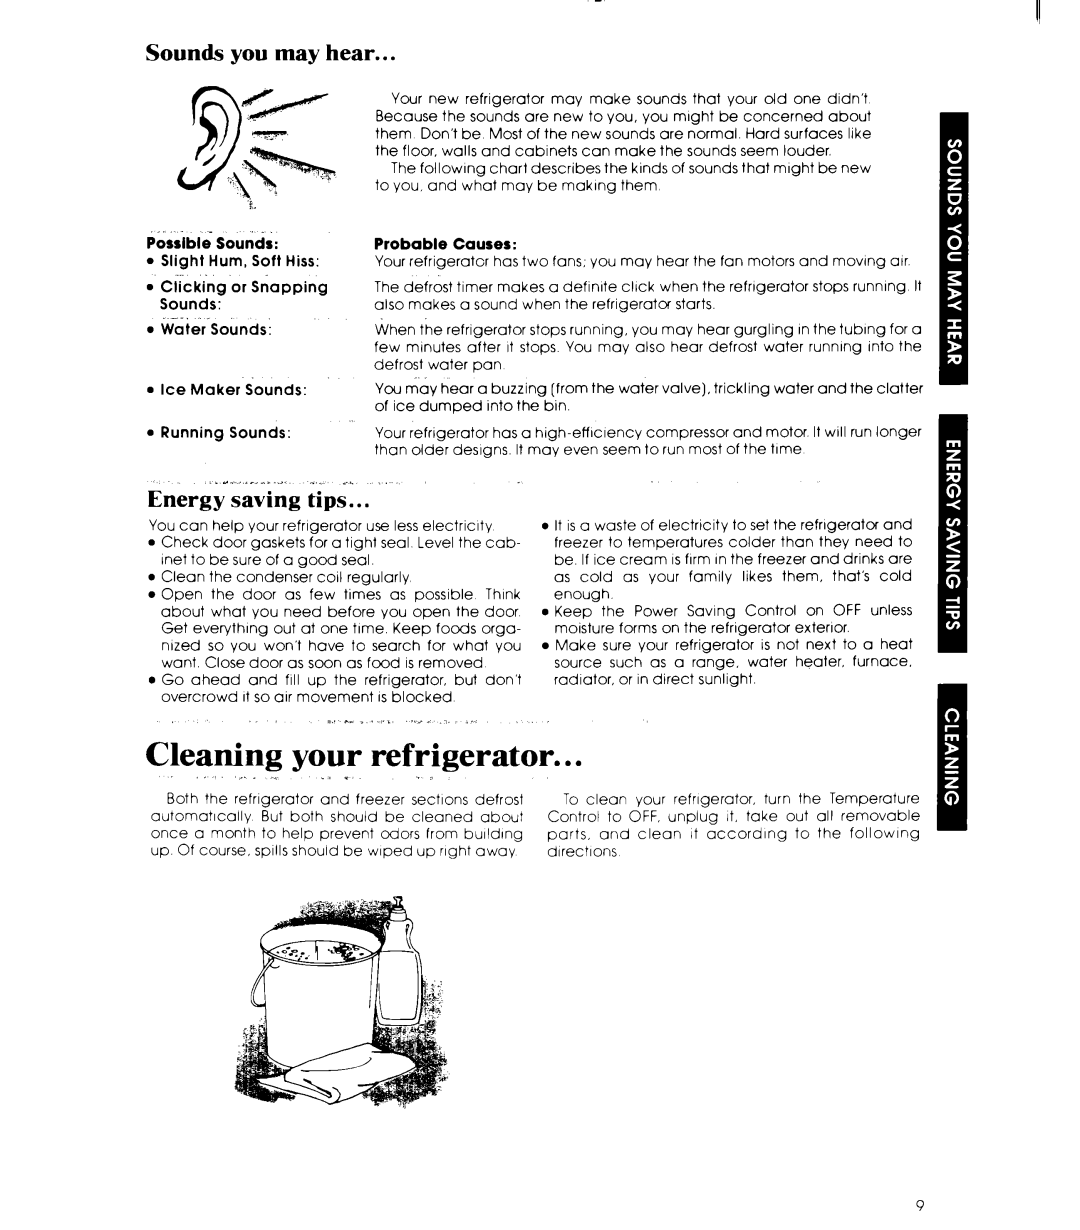 Whirlpool ED25SM manual refrigerator, Sounds you may hear, Energy saving tips, Cleaning your 